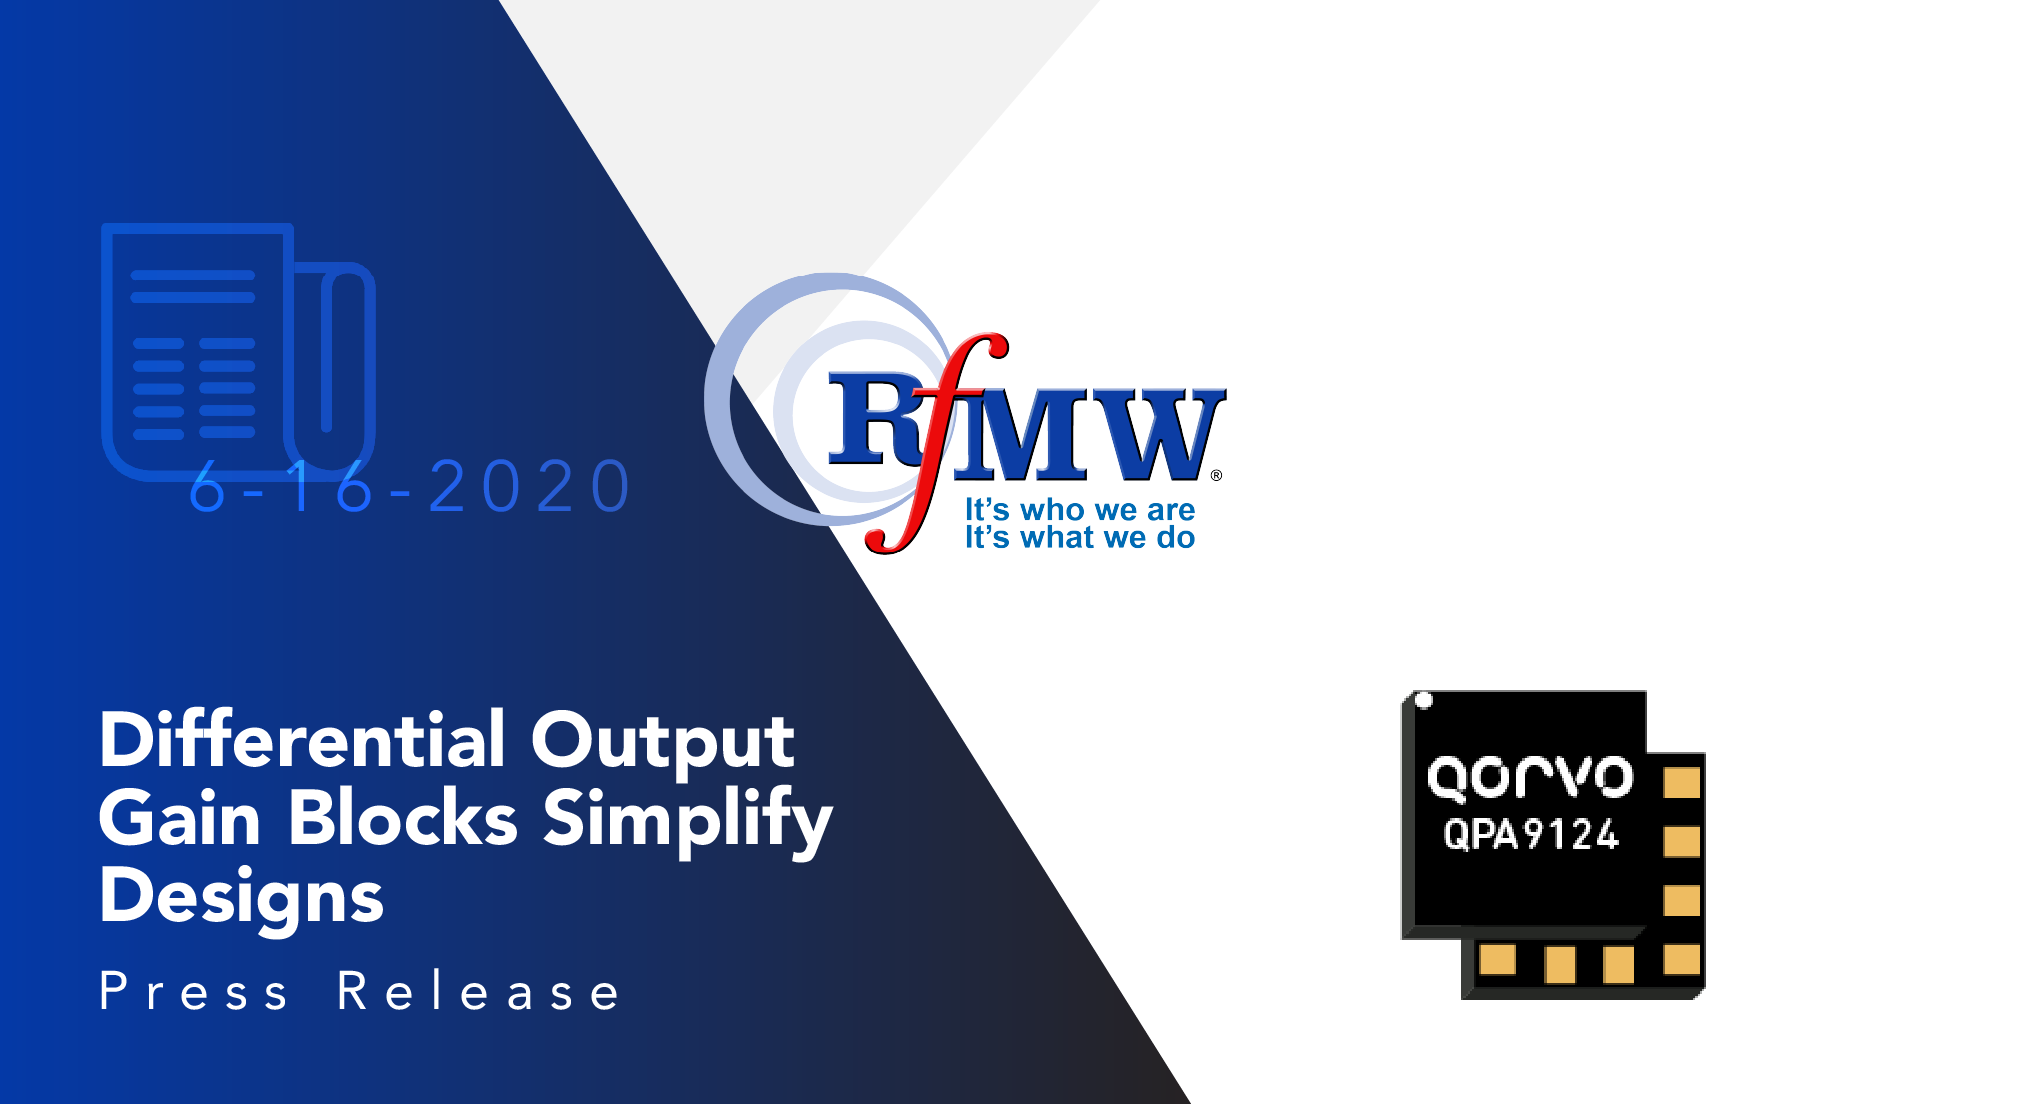 The Qorvo QPA9124 gain block with differential output offers a 50 Ω single-ended input to 100 Ω differential output for 3 to 5 GHz 5G m-MIMO